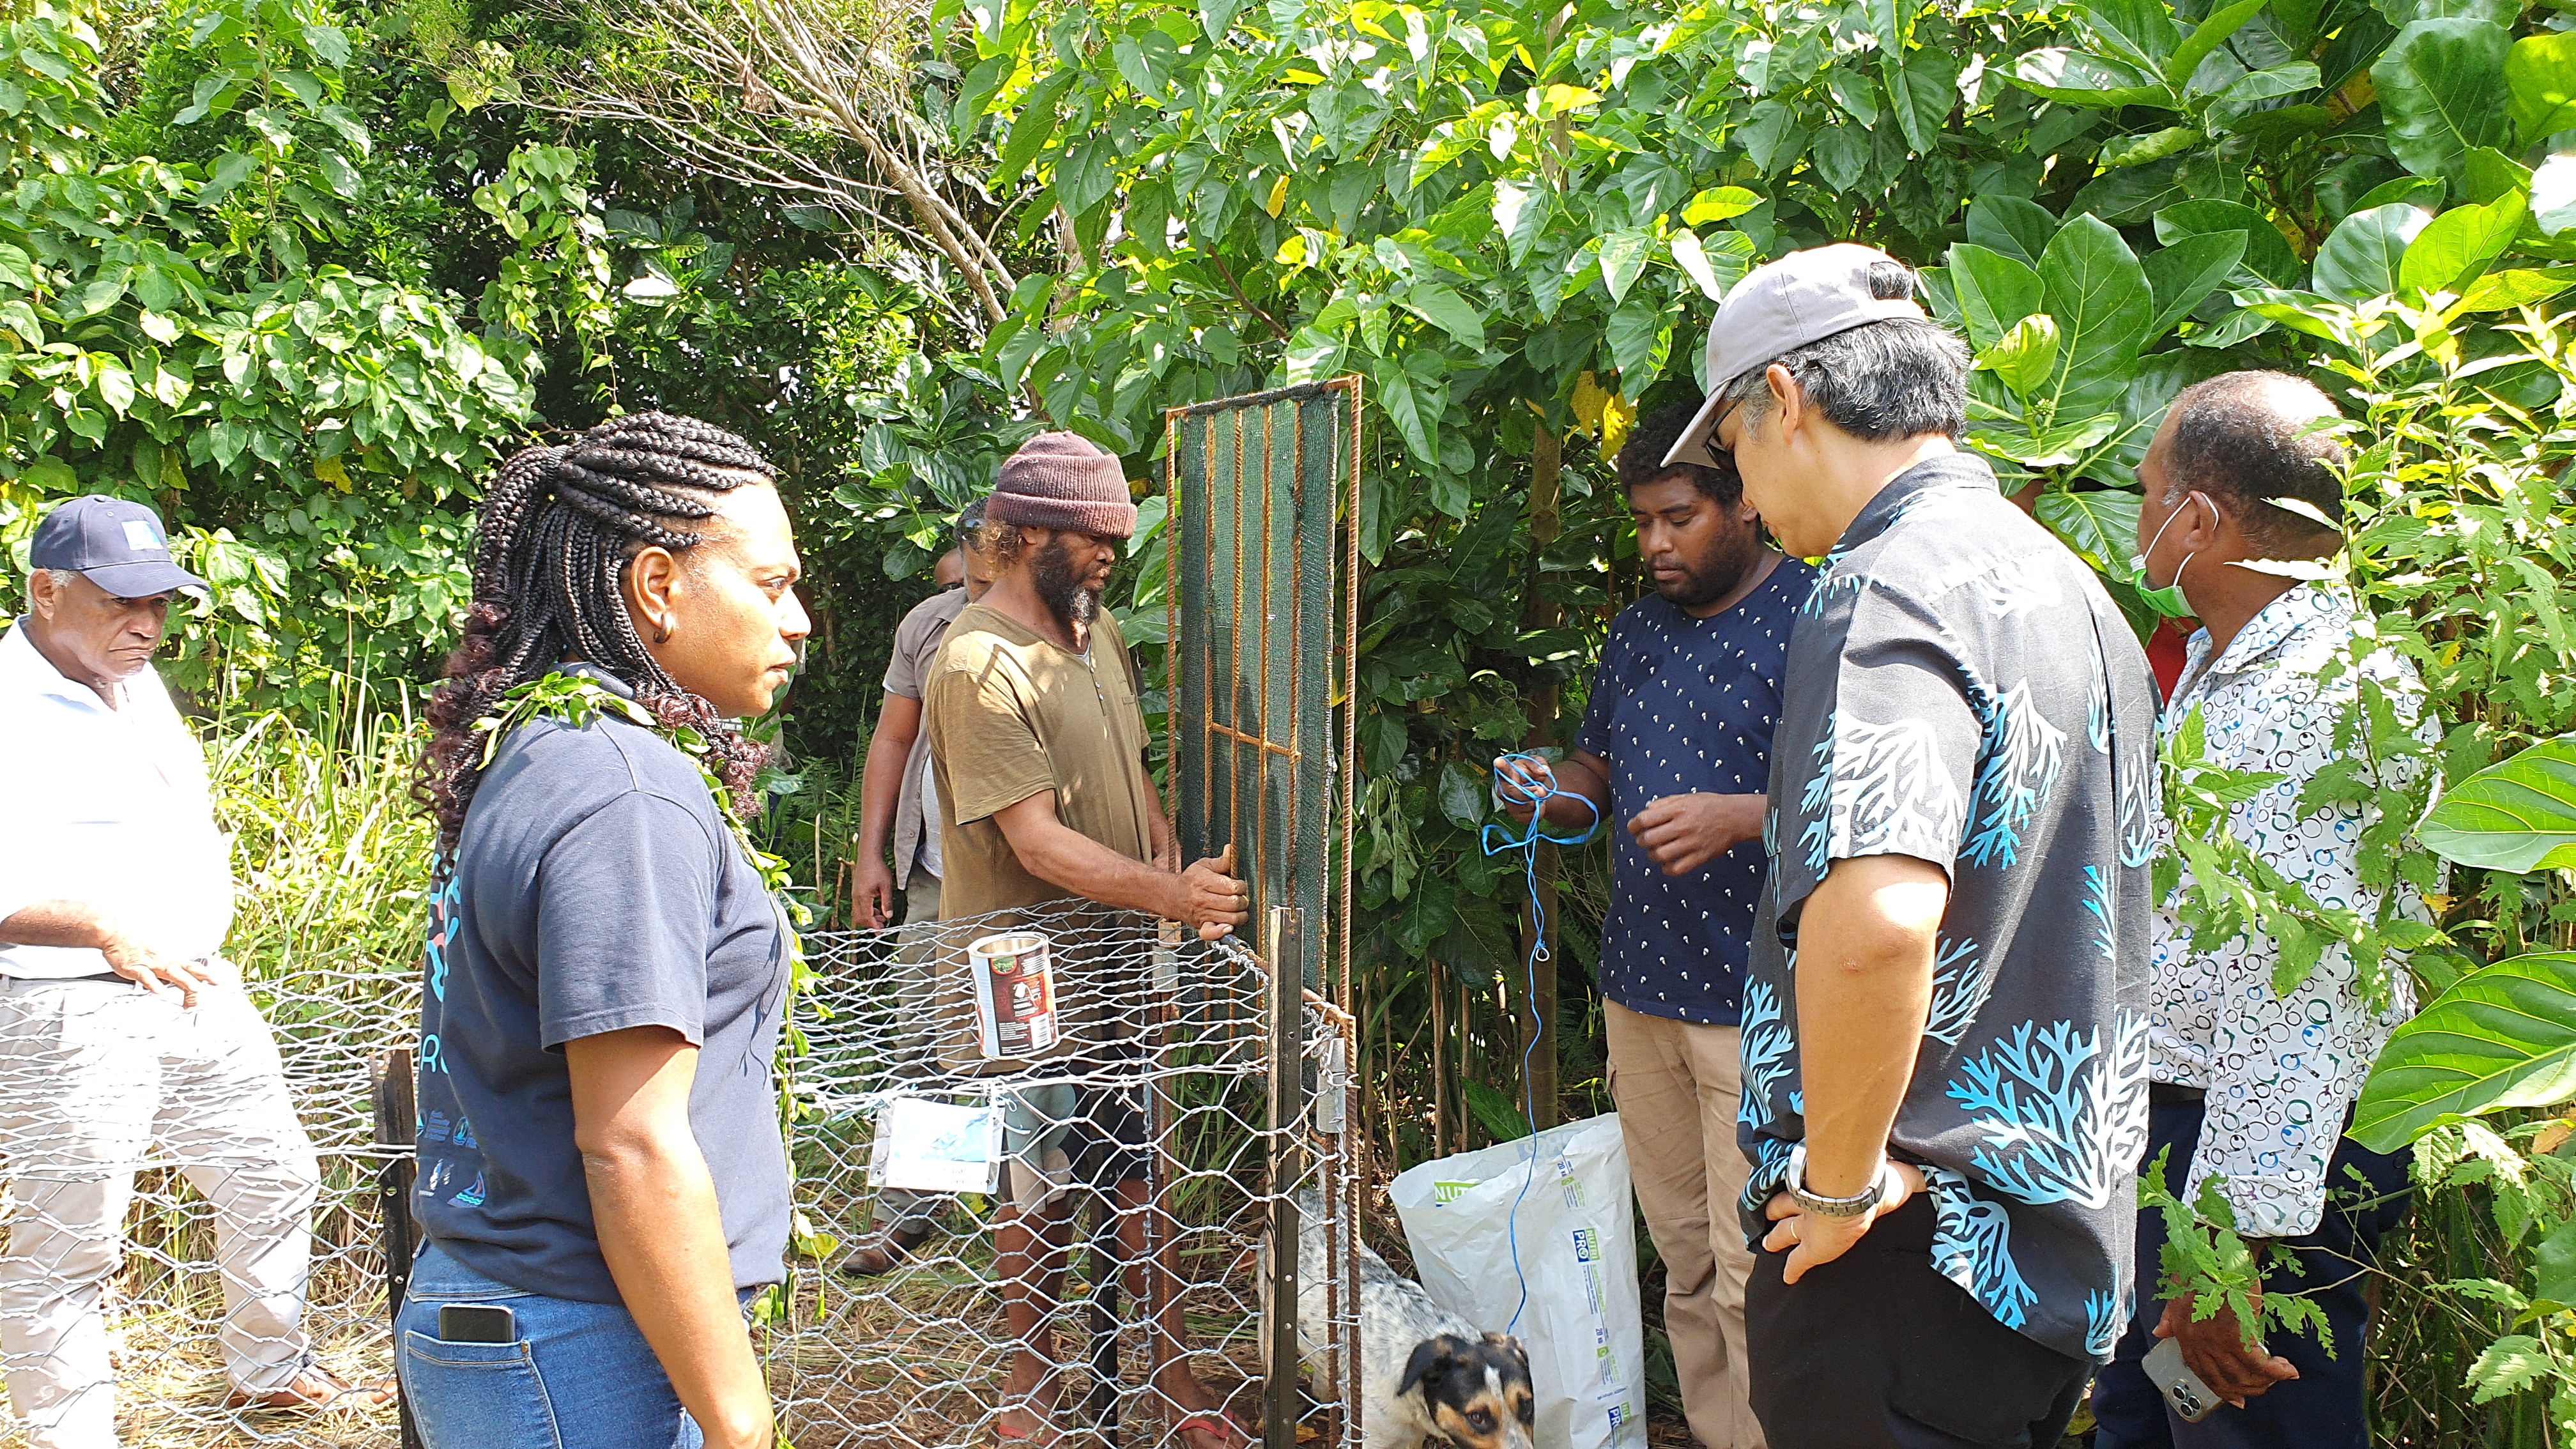 Demonstration of cage traps and rope snares to control invasive species.